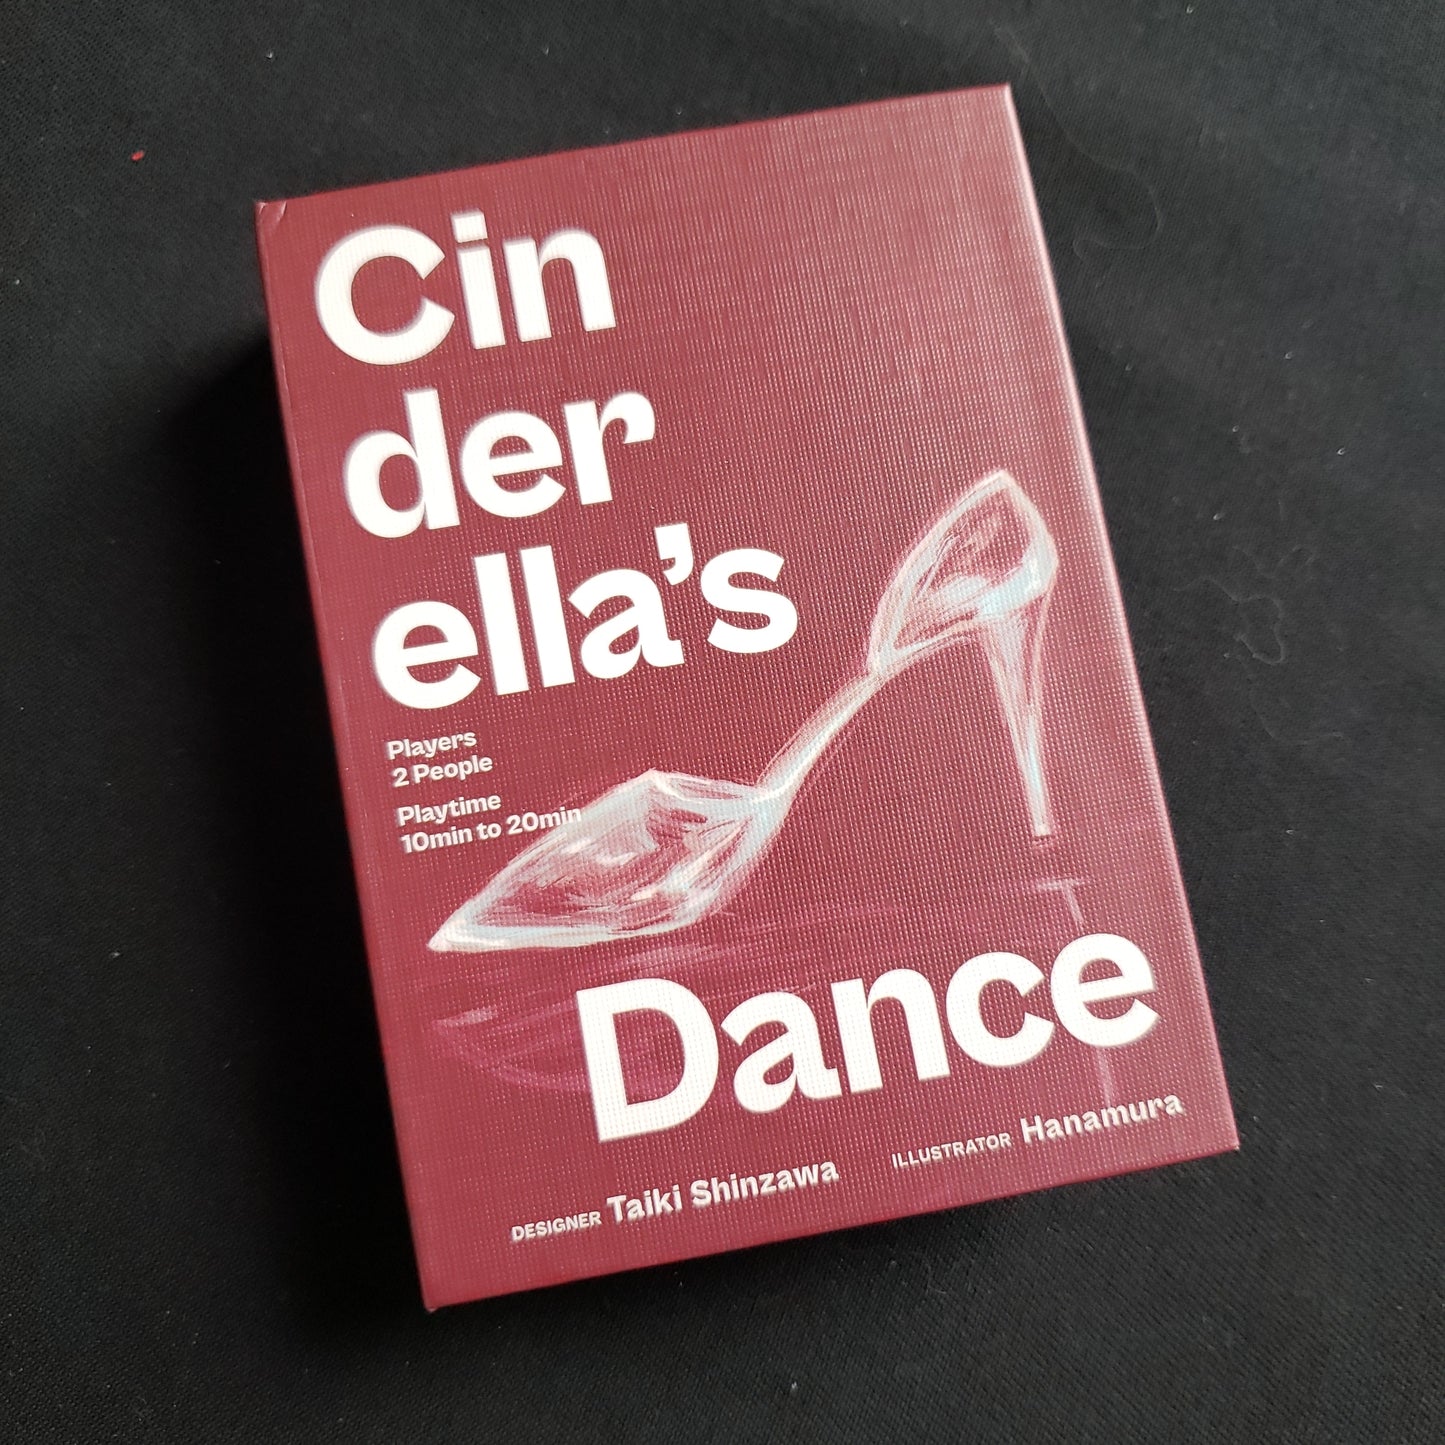 Image shows the front cover of the box of the Cinderella's Dance card game